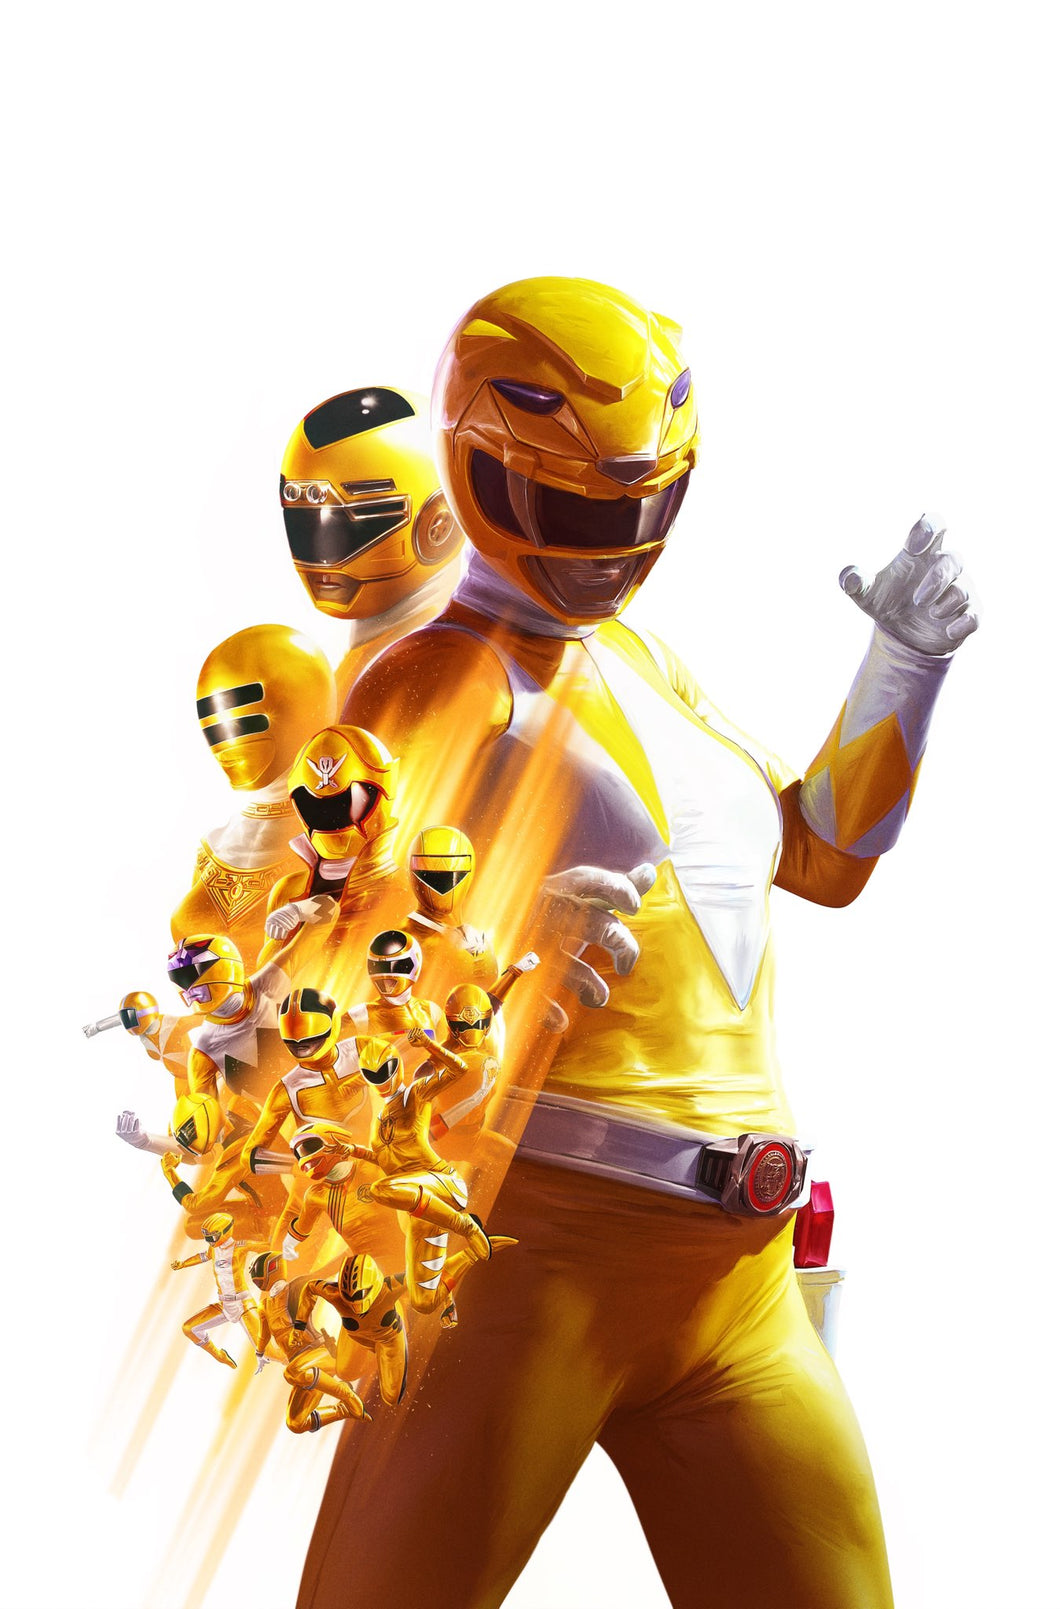 Mighty Morphin Power Rangers #110 Forever Yellow Dattoli Variant